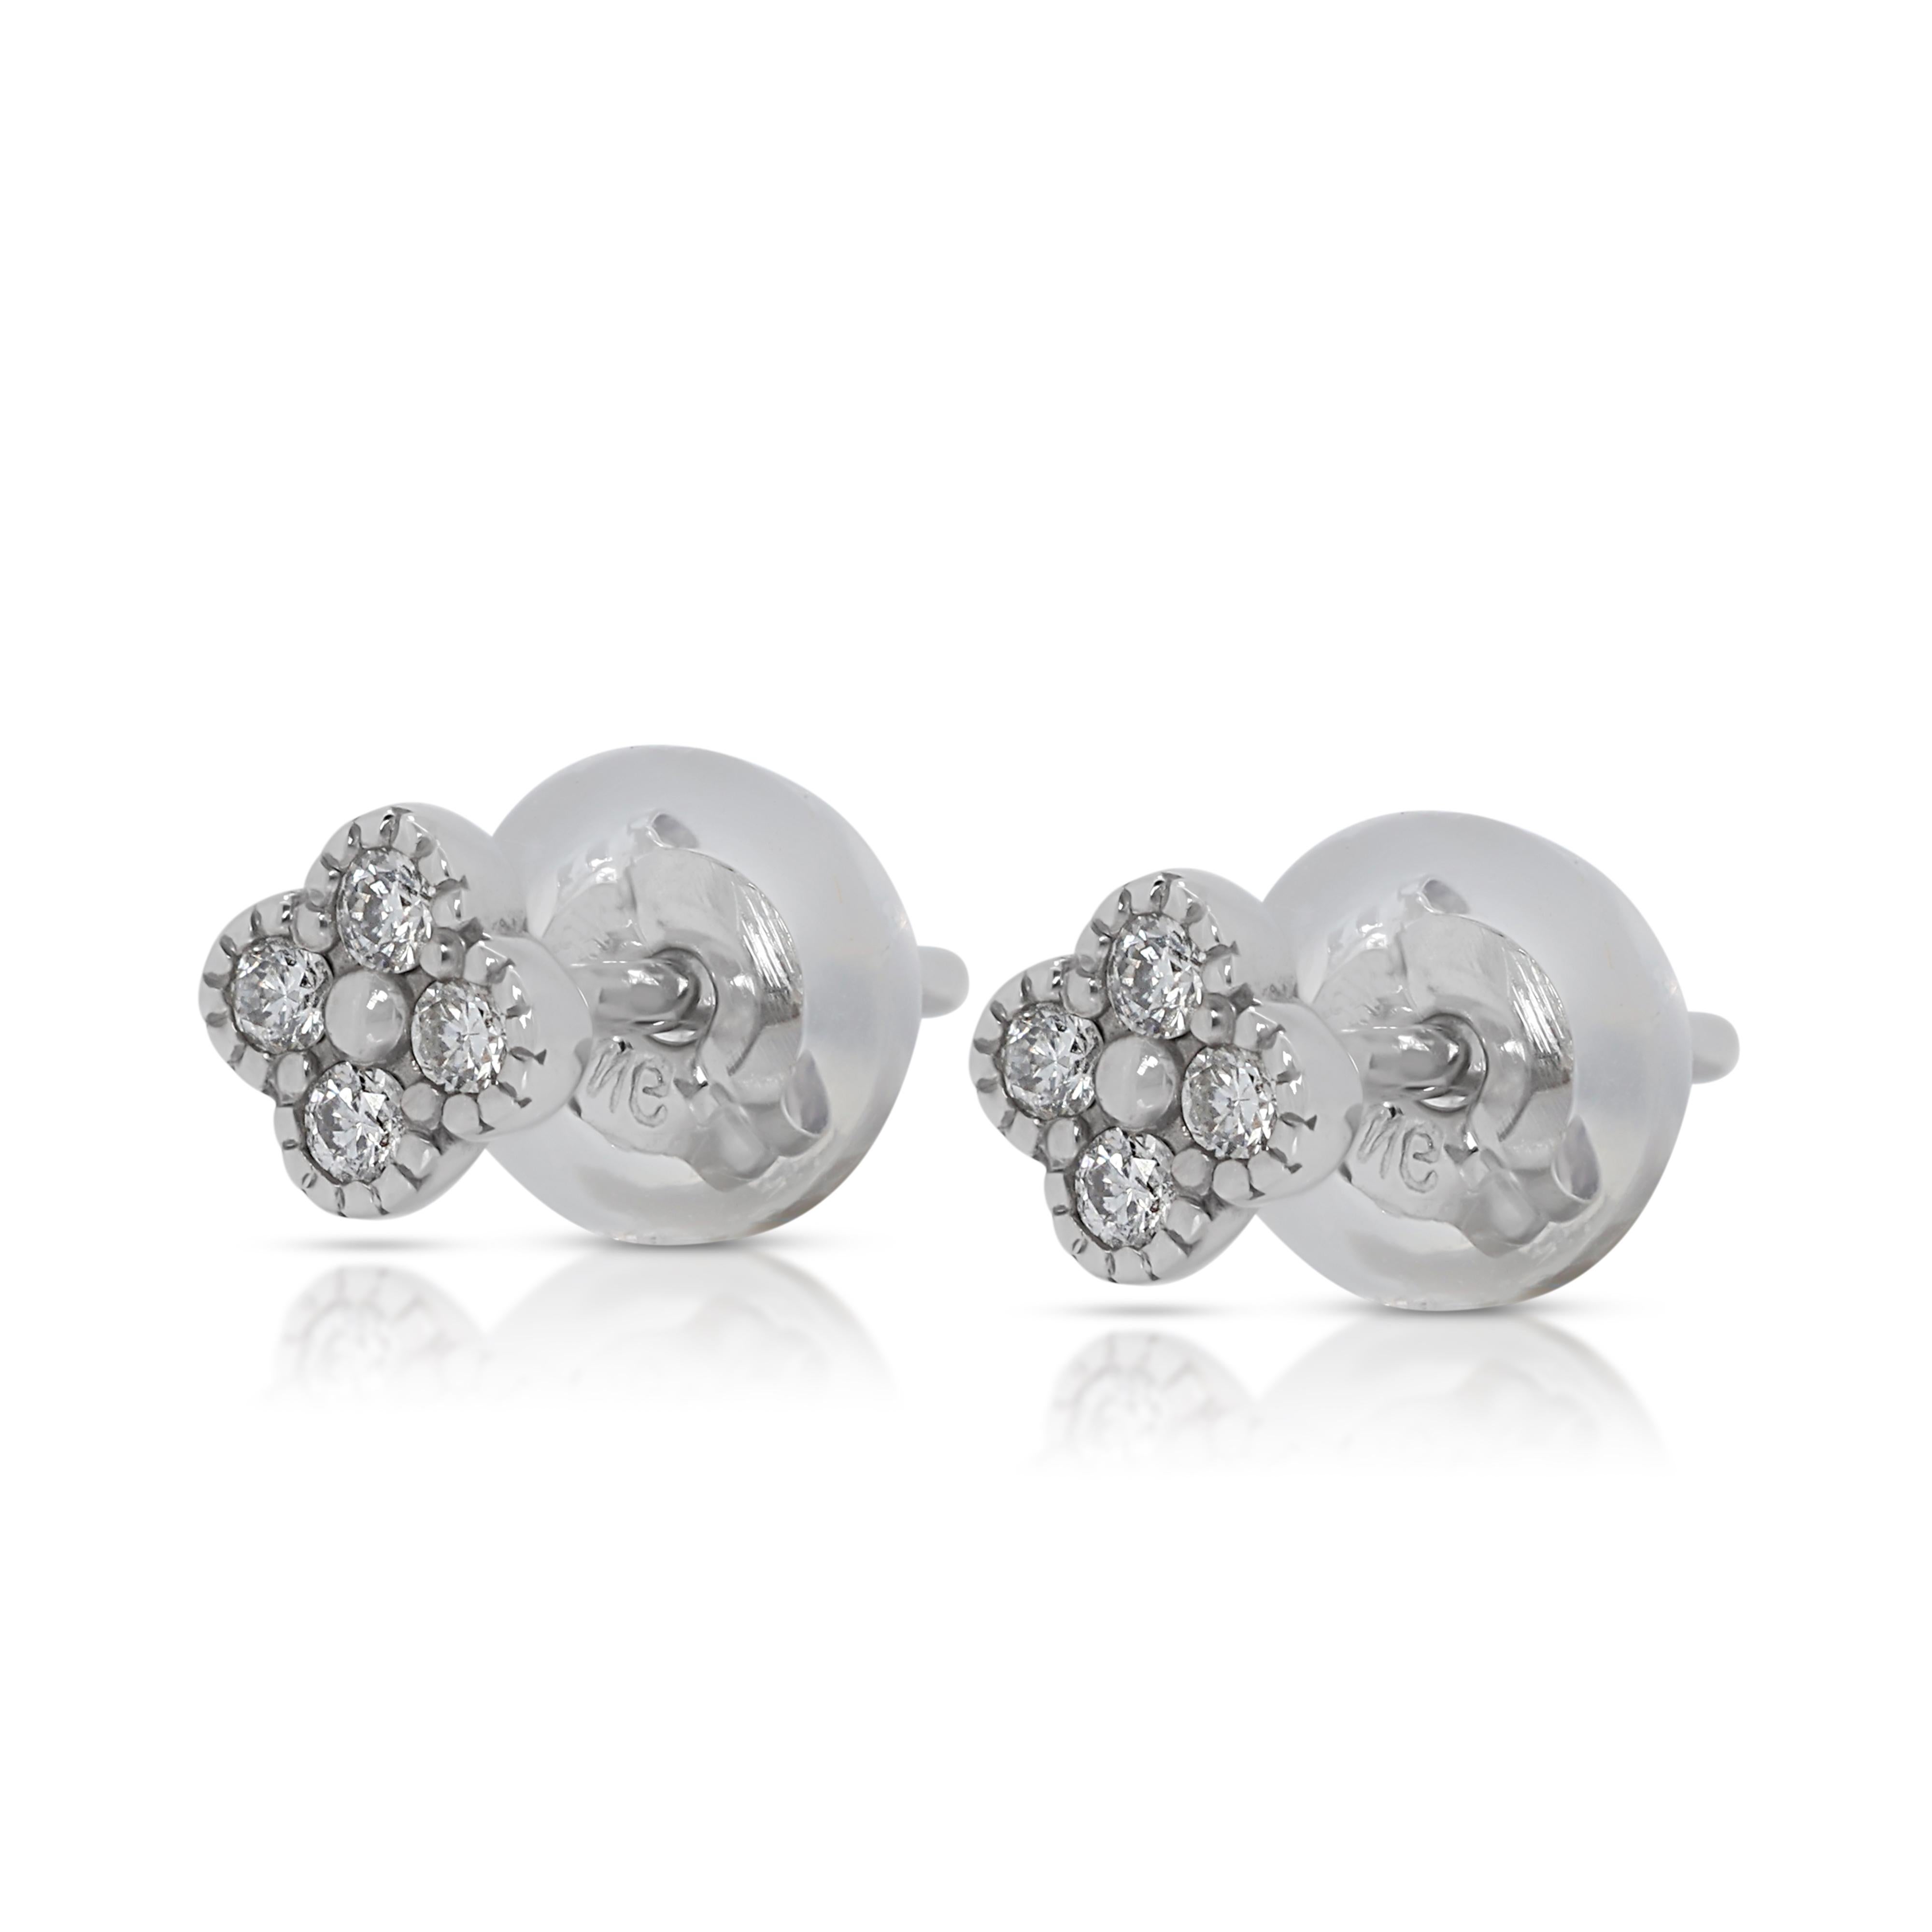 Round Cut Captivating 0.08ct Diamond Stud Earrings in 10K White Gold For Sale